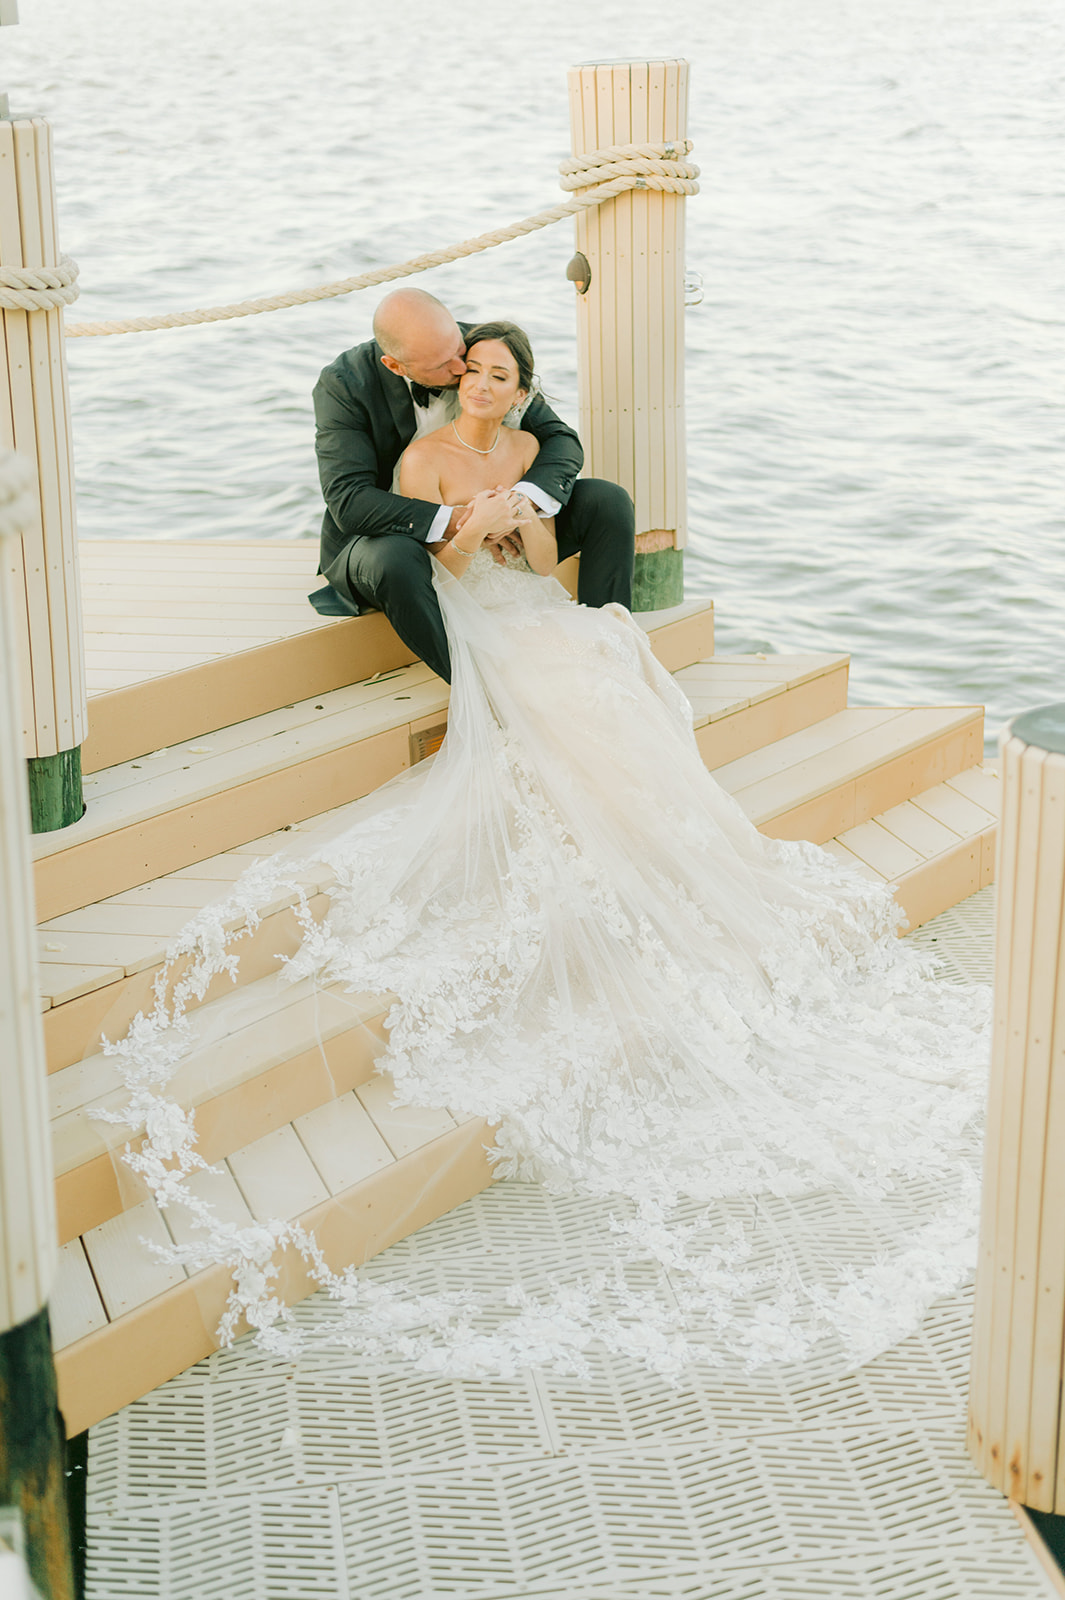 Timeless Fine Art Wedding Photography in Marco Island - Cherishing Your Memories Forever
